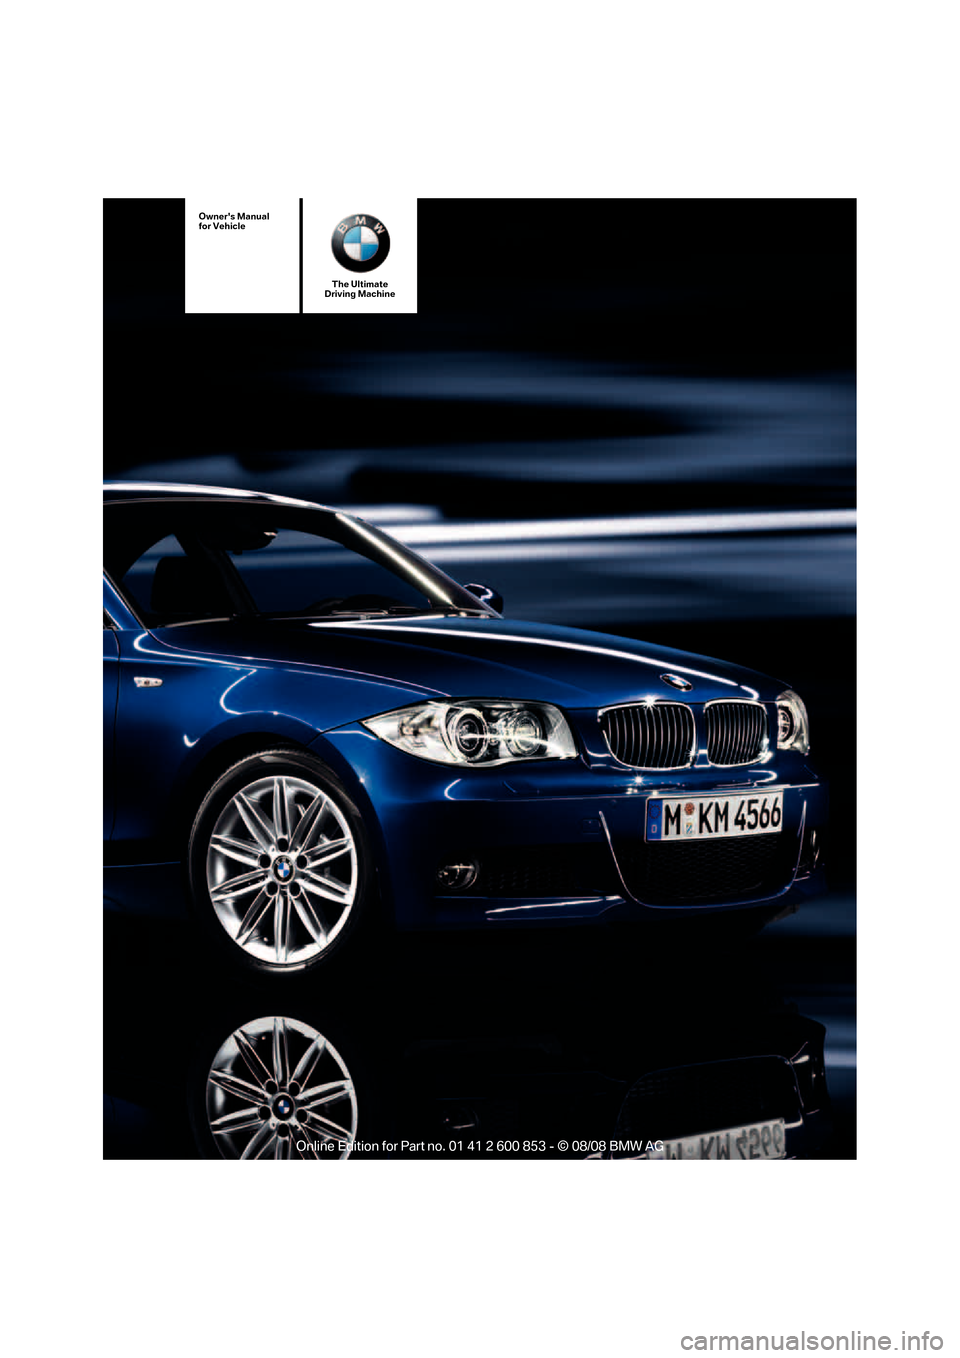 BMW 128I 2009 E81 Owners Manual The Ultimate
Driving Machine
Owners Manual
for Vehicle 